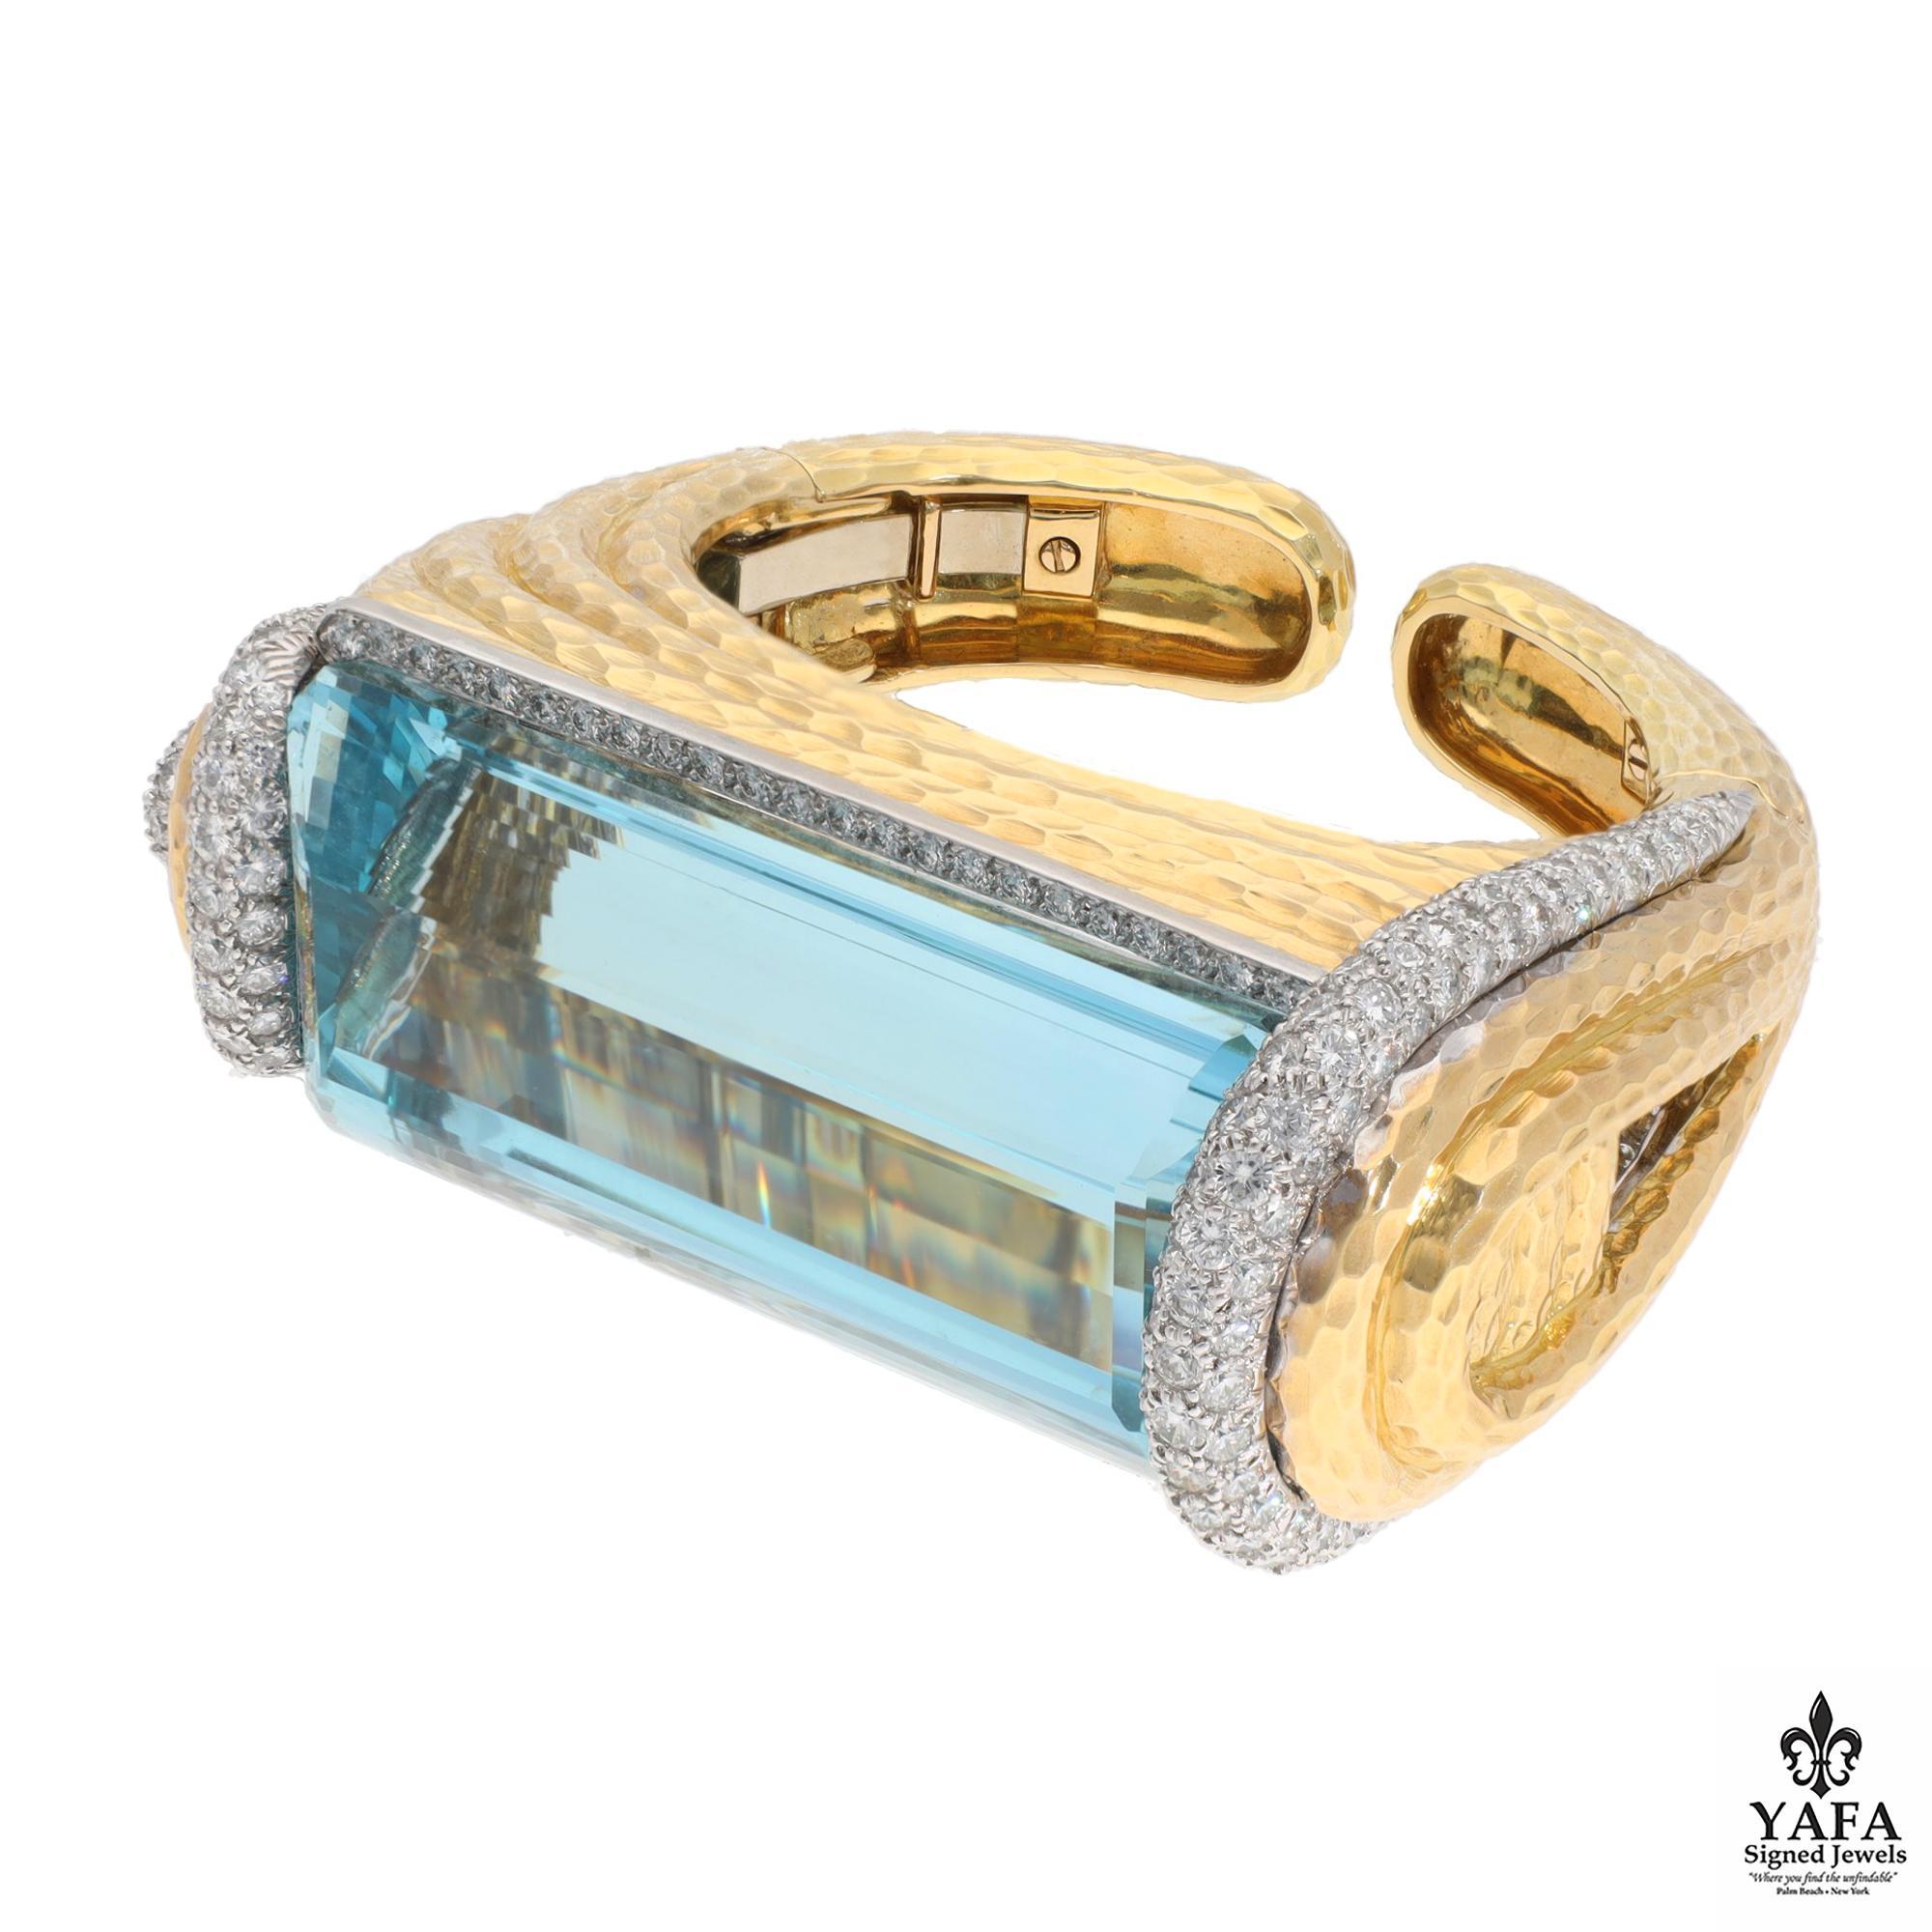 David Webb 18K Yellow Gold & Platinum, Aquamarine and Diamond Cuff. Prominently featuring a 300 CT Aquamarine. This particular Aquamarine is know for it's stunning blue-green hue so reminiscent of the ocean.  
Aquamarine approximate weight - 300